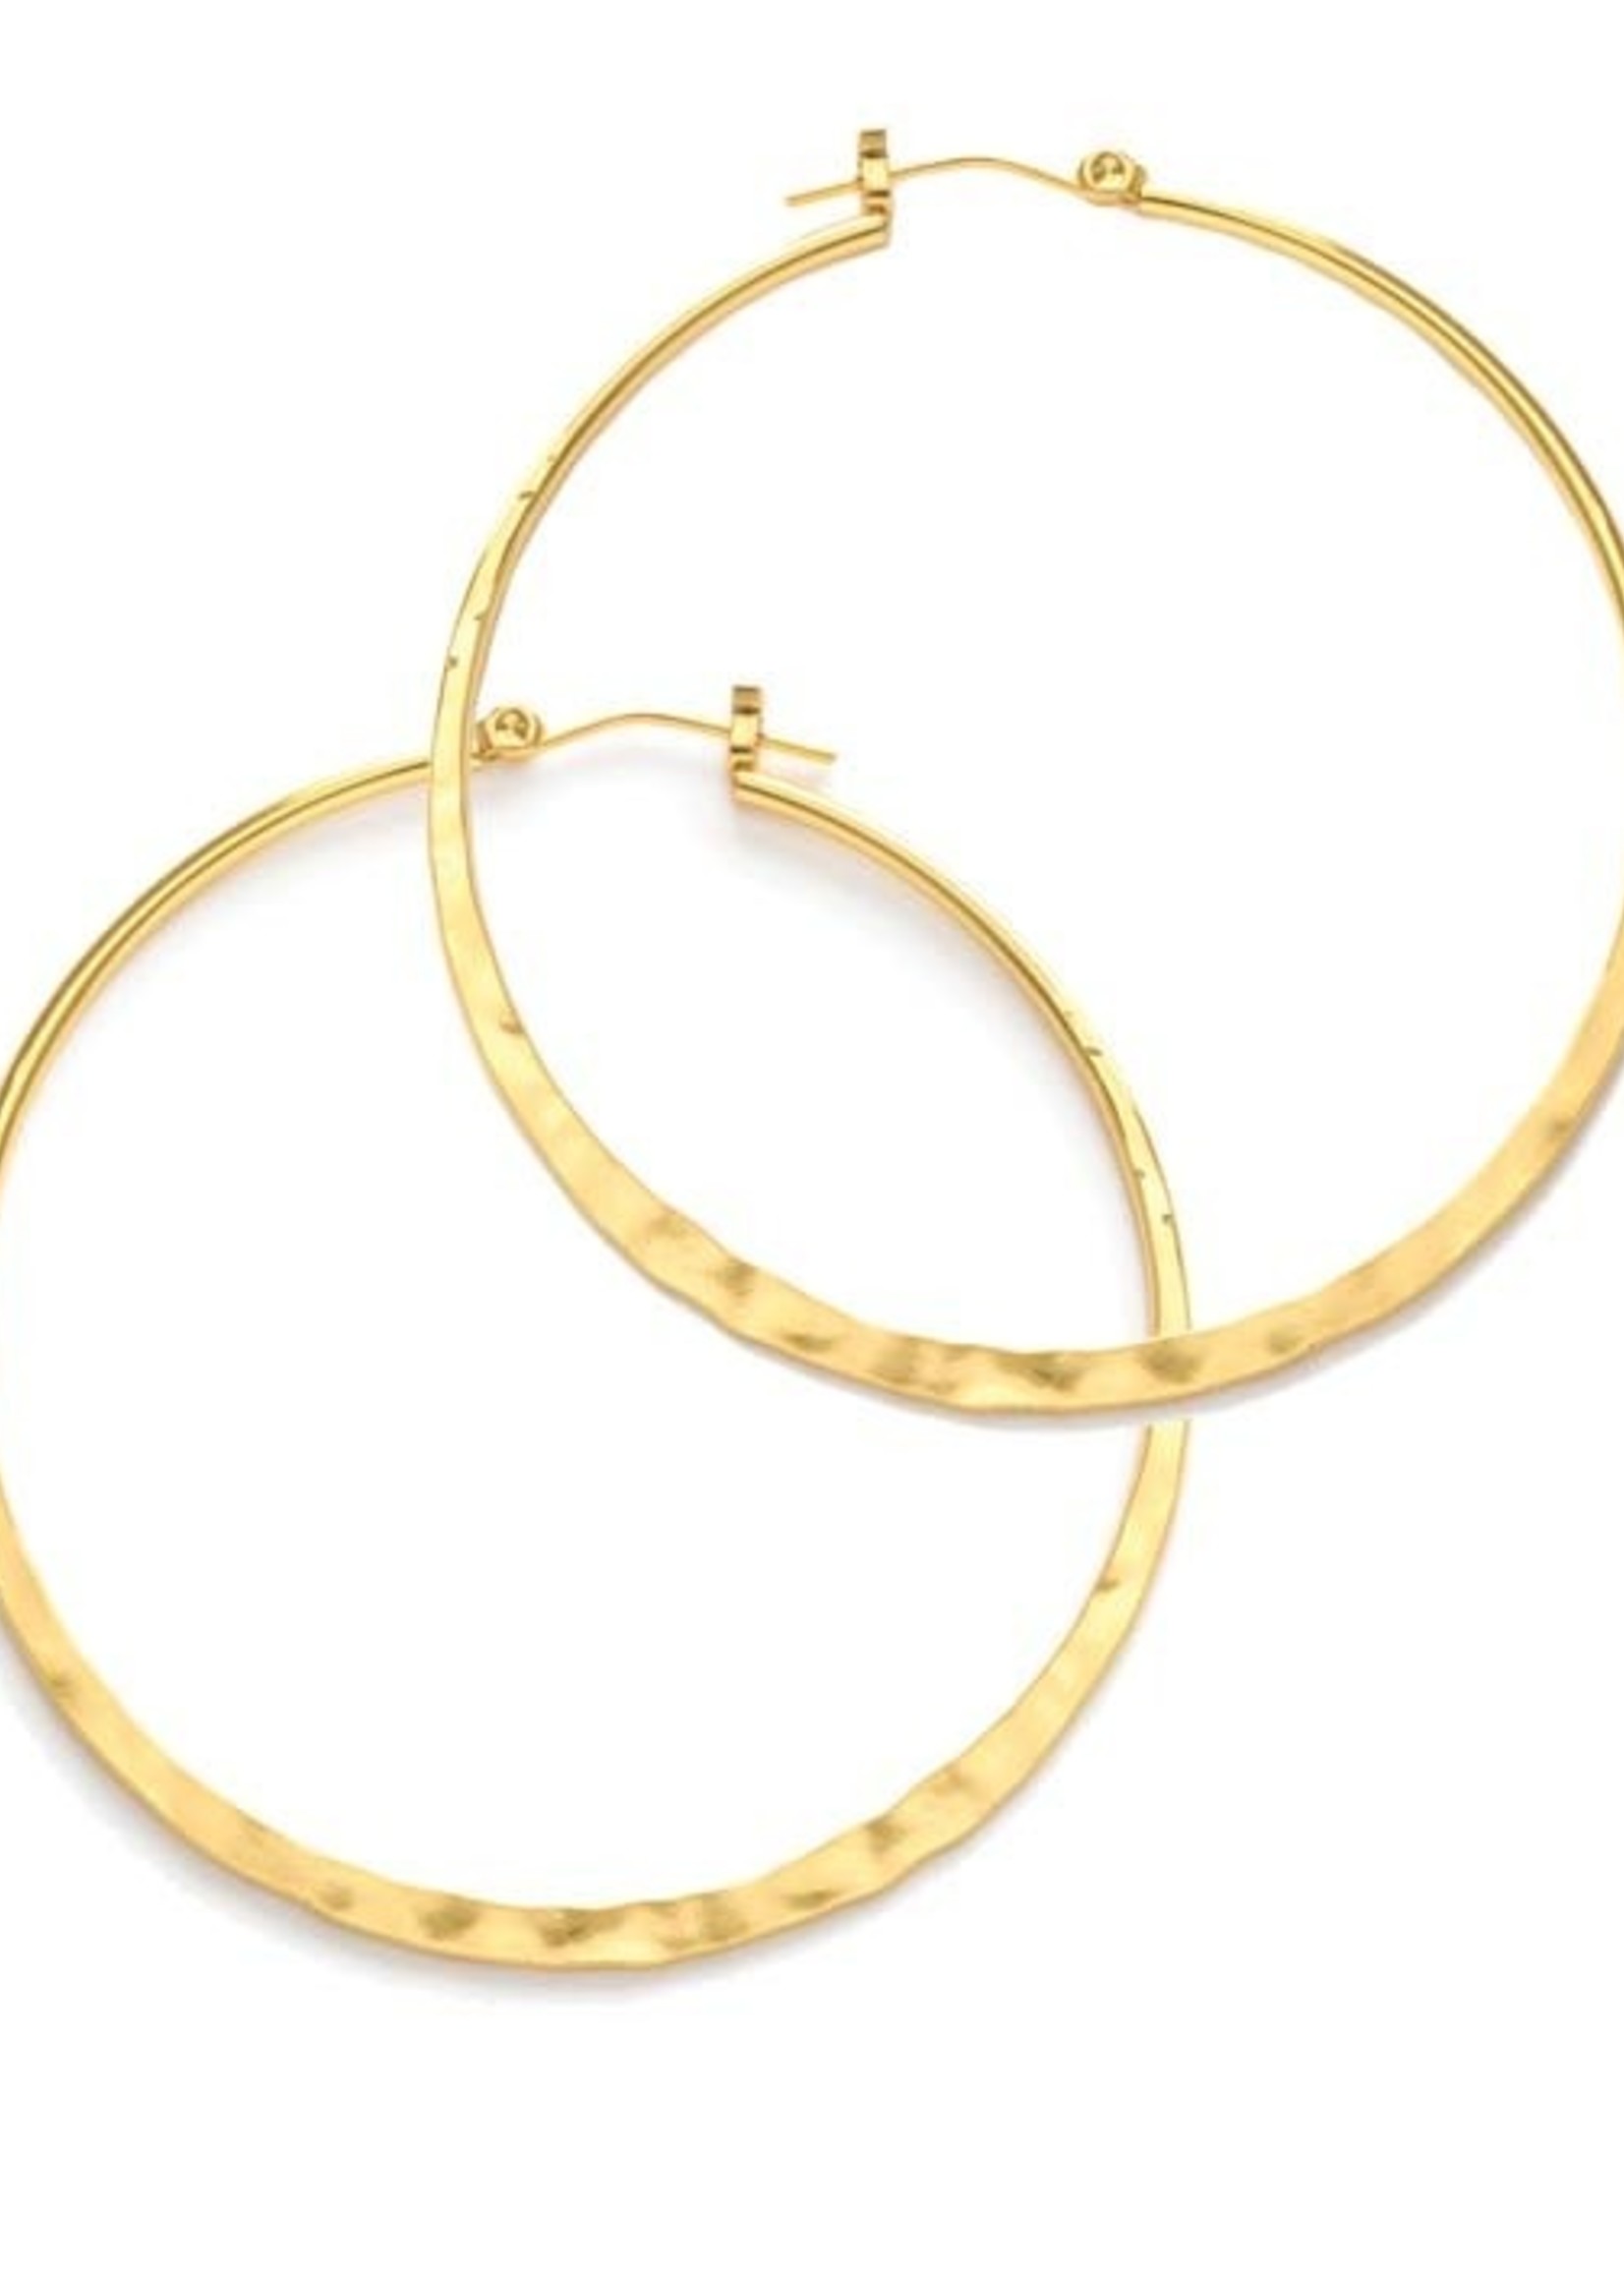 AMANO studio HAMMERED Hoops, 24K gold plated, 2"